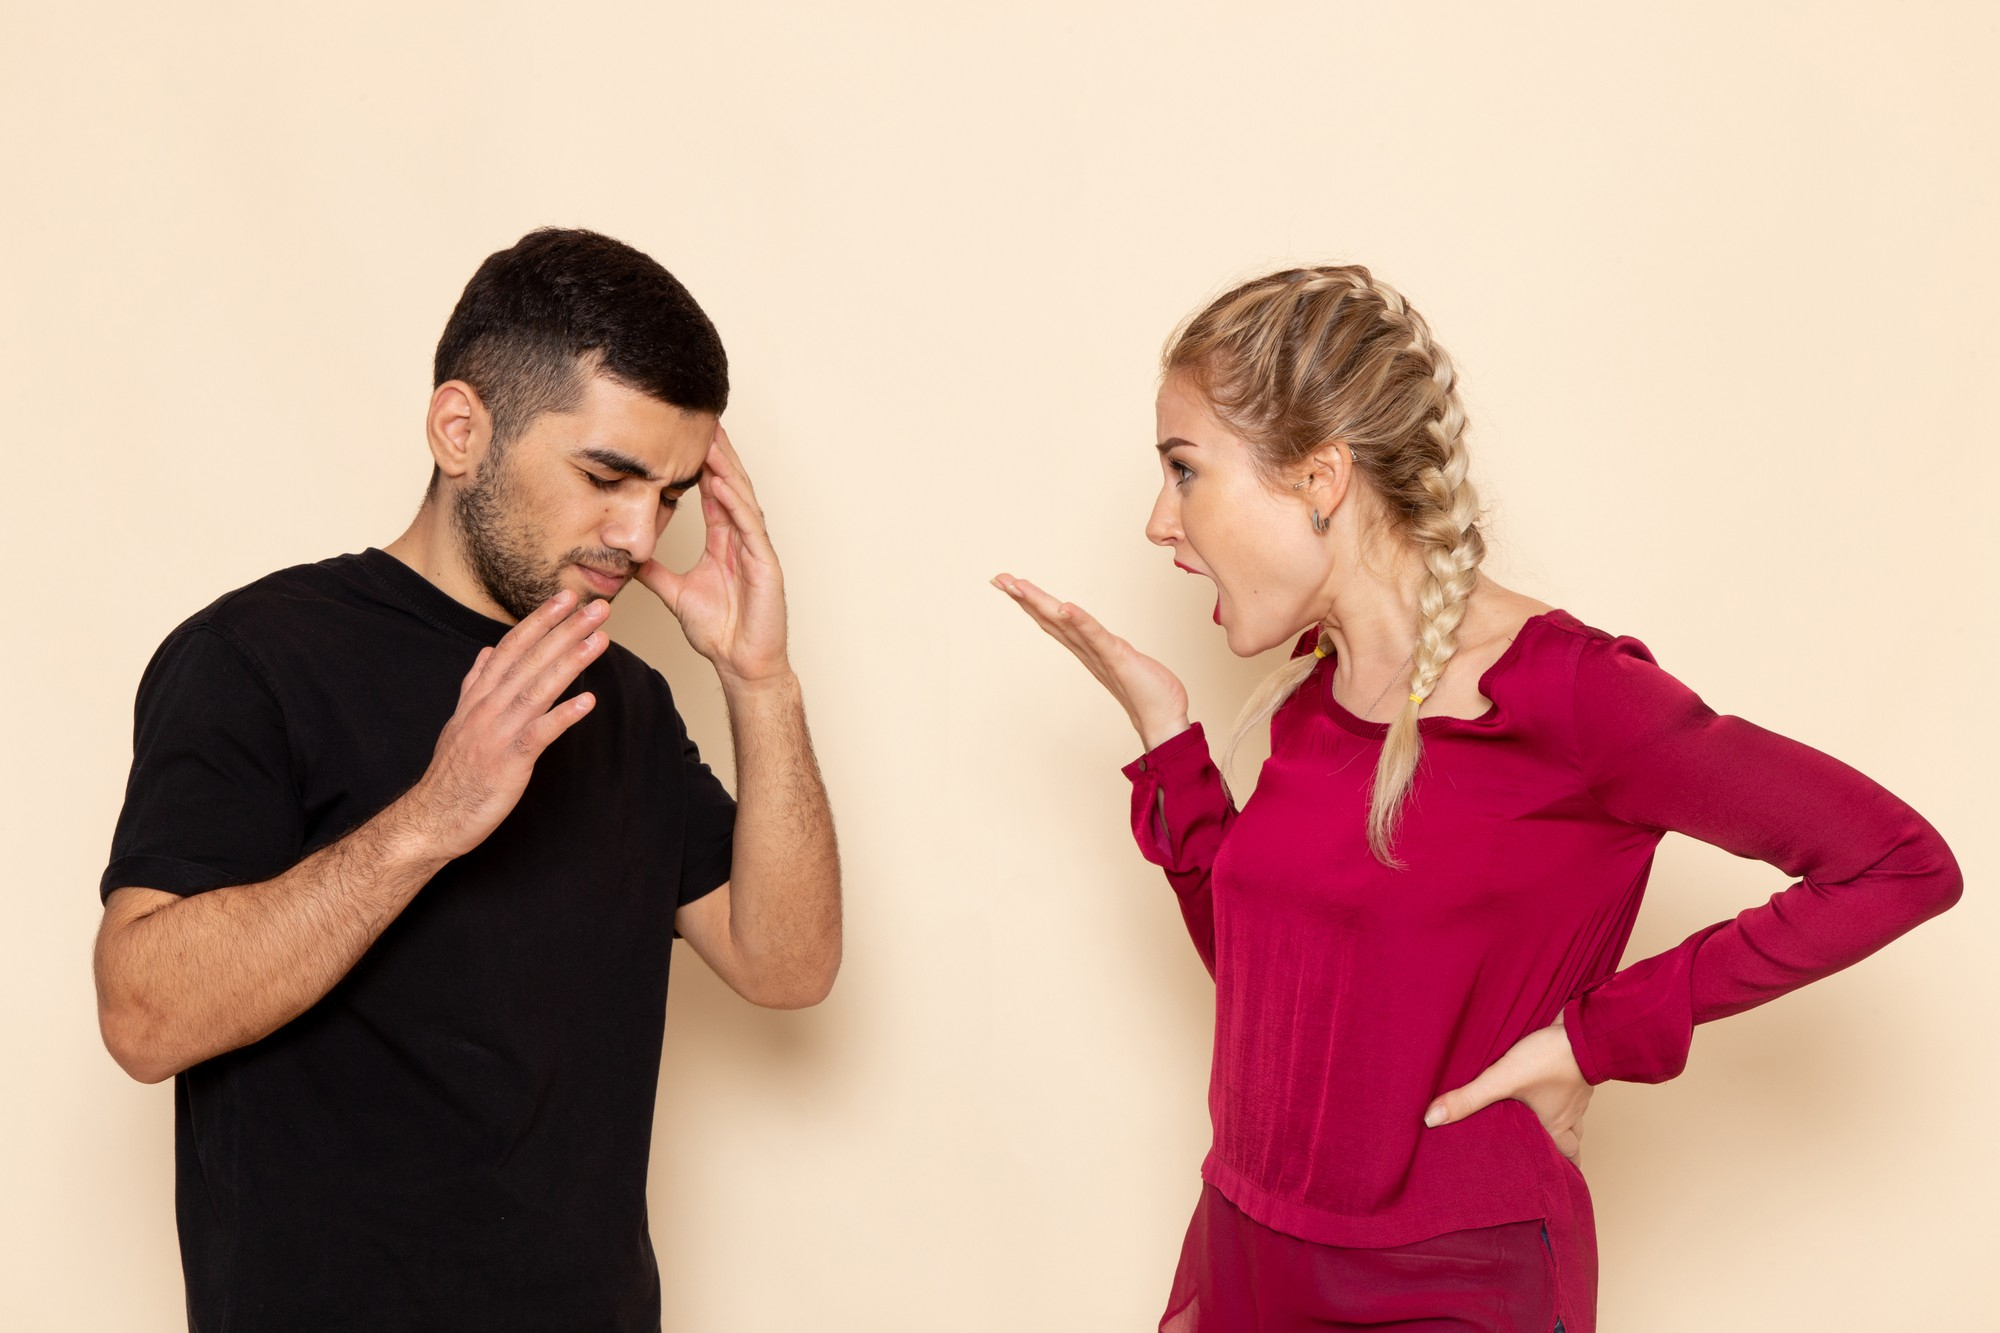 A woman shouting at a man who seems confused and overwhelmed | Source: Freepik